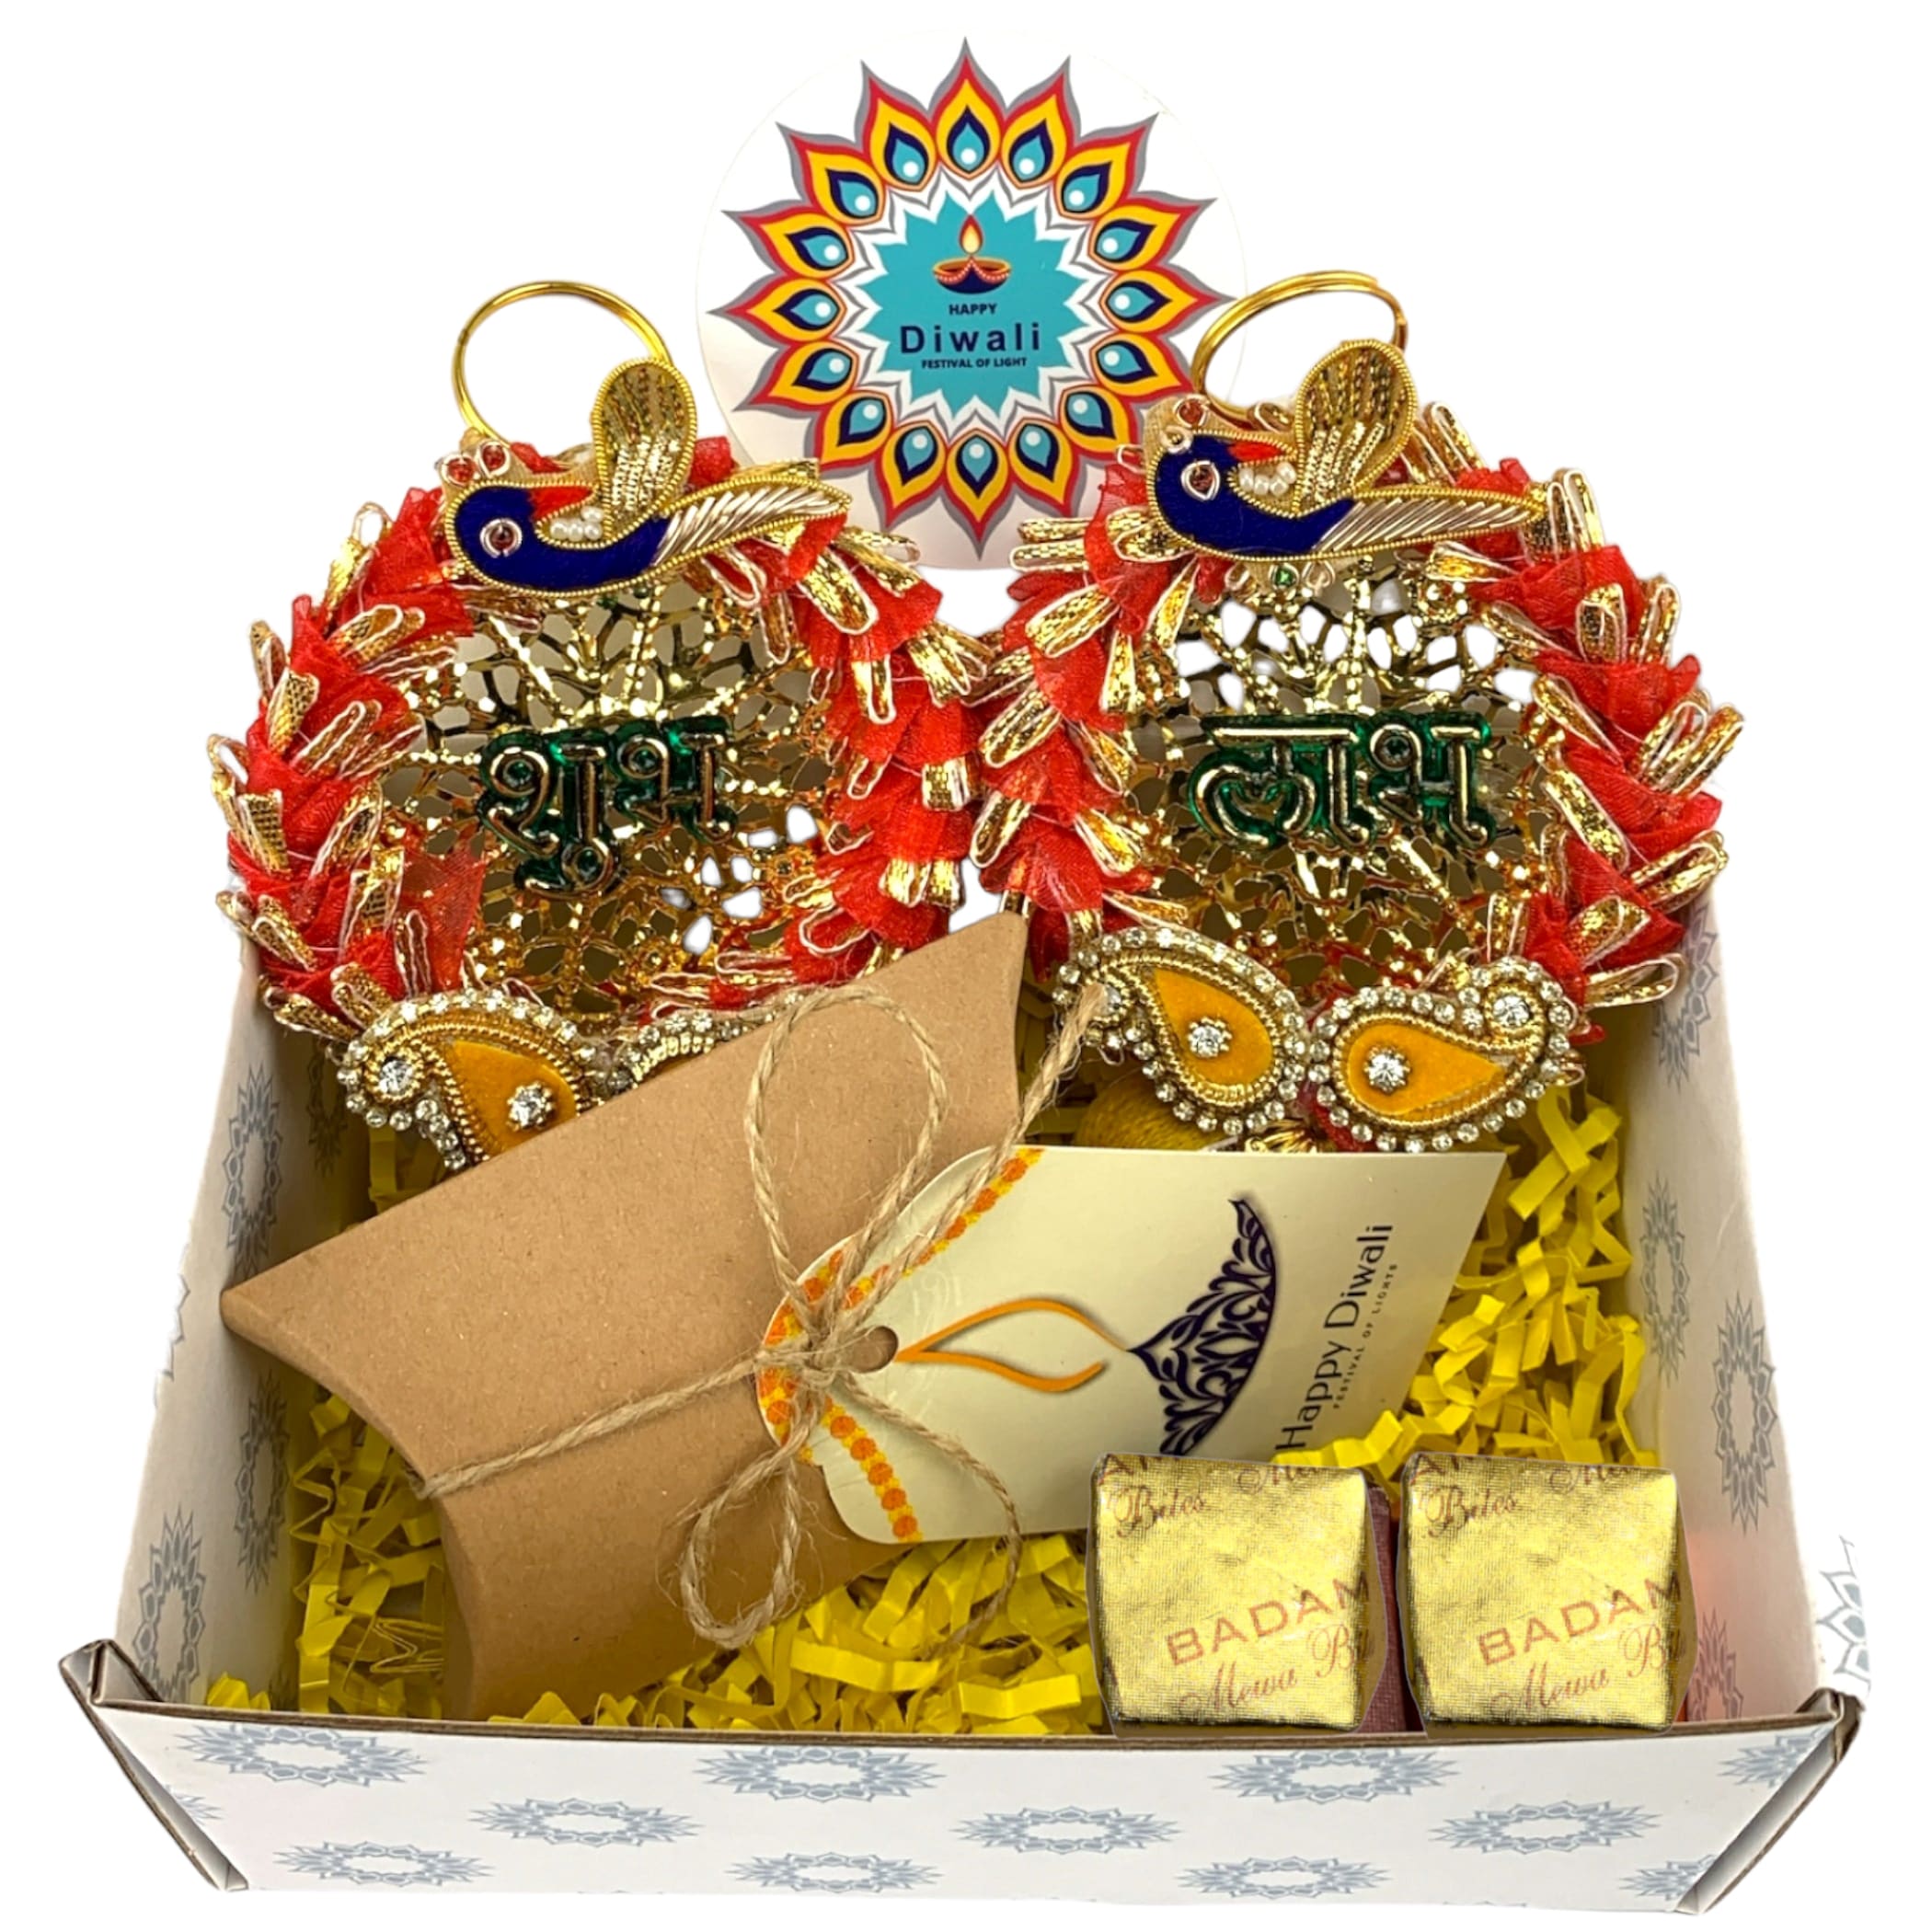 Diwali gift (shubh labh and indian sweets) personalize gifts